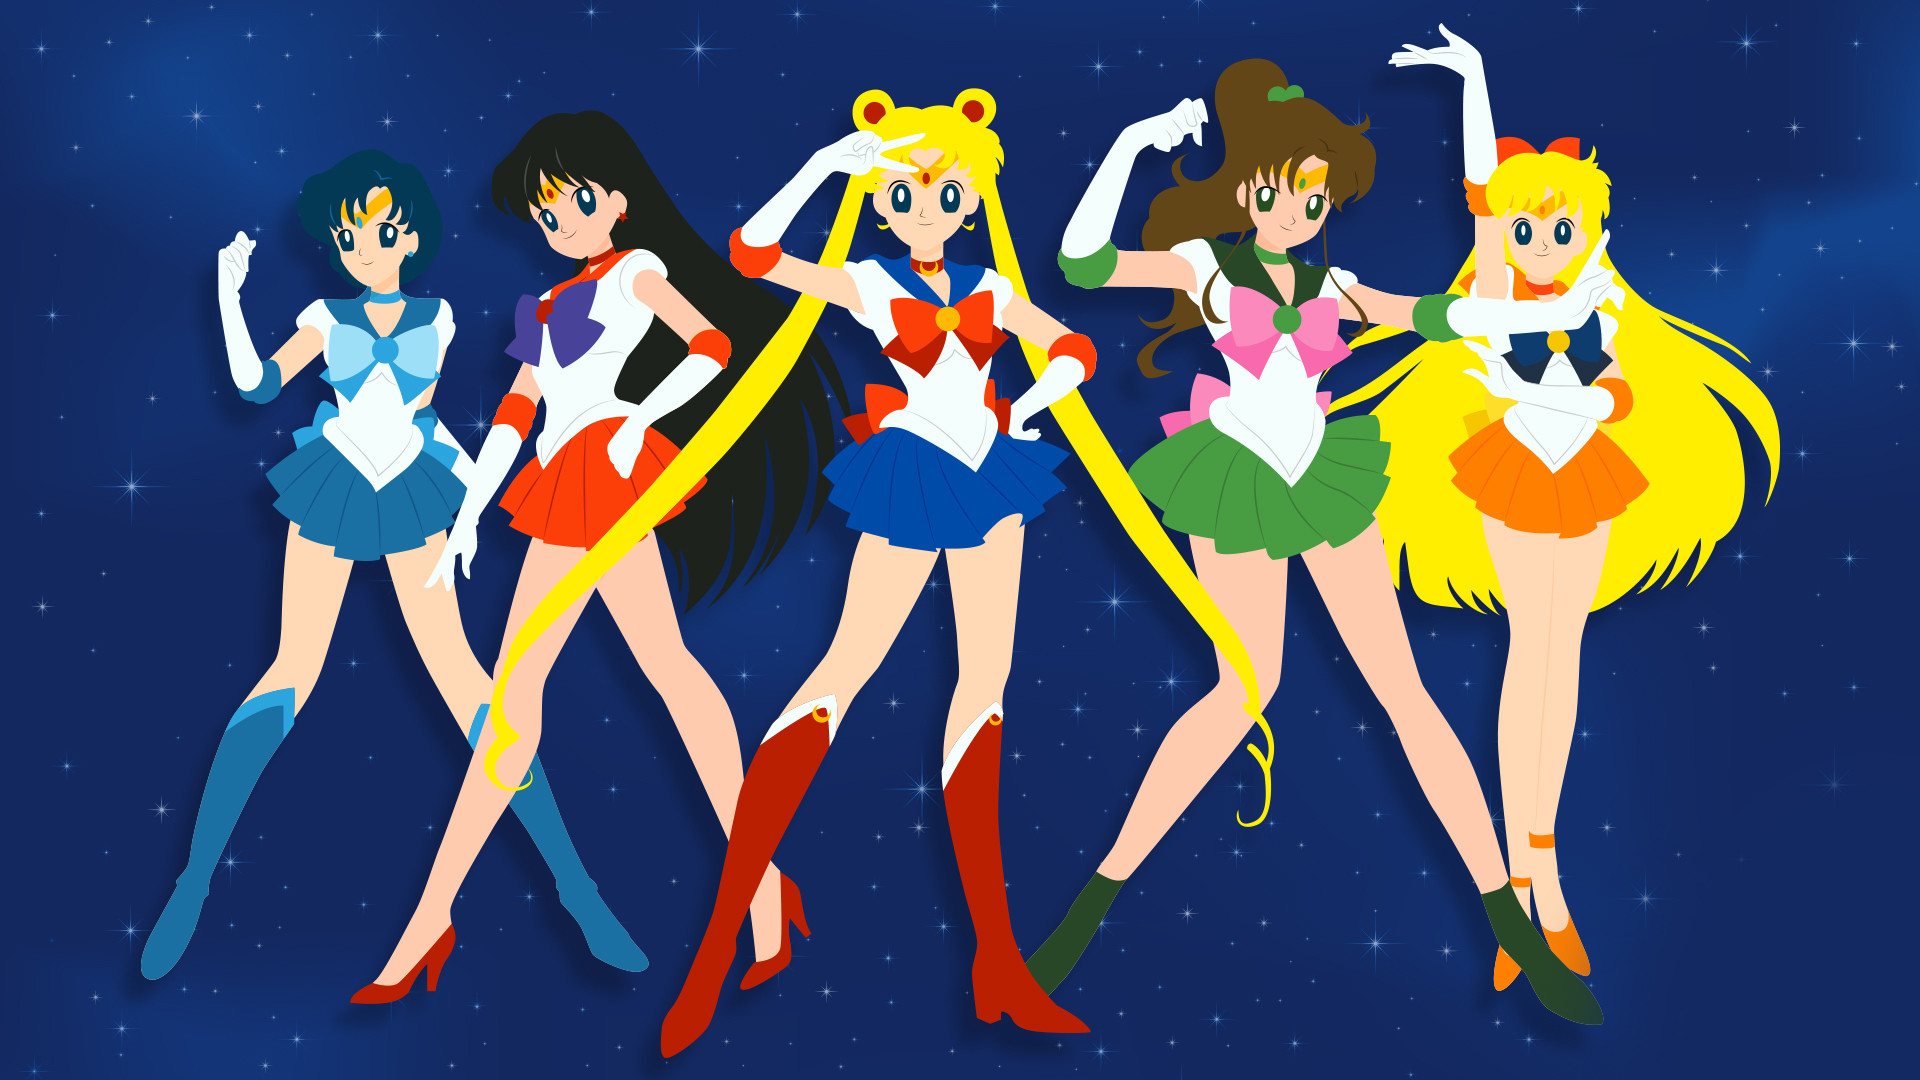 1920x1080 Sailor Moon Wallpapers and Photos In FHDQ For Download 1920Ã1080